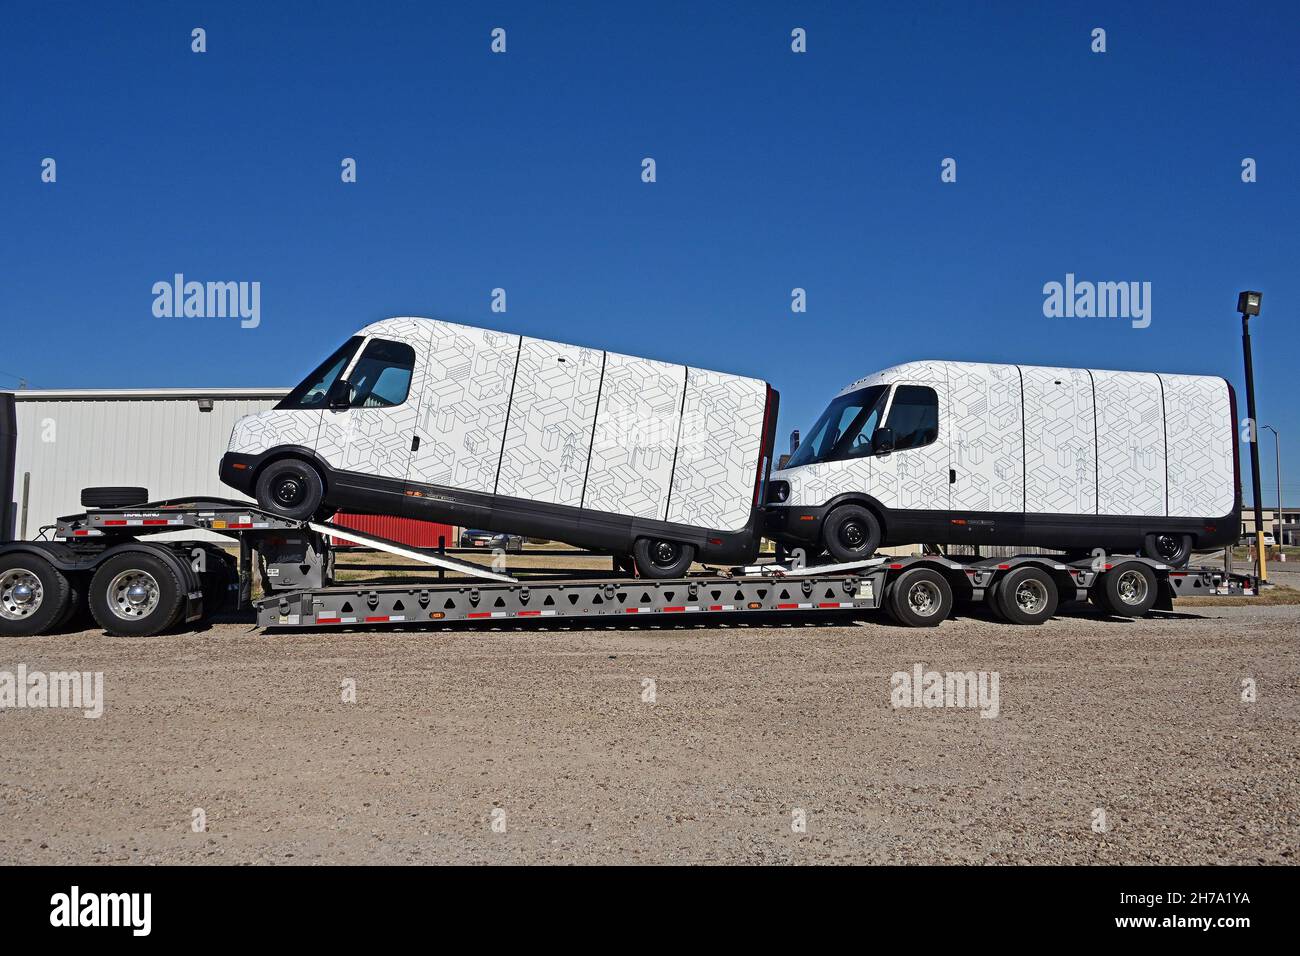 Ion Drive High Resolution Stock Photography and Images - Alamy